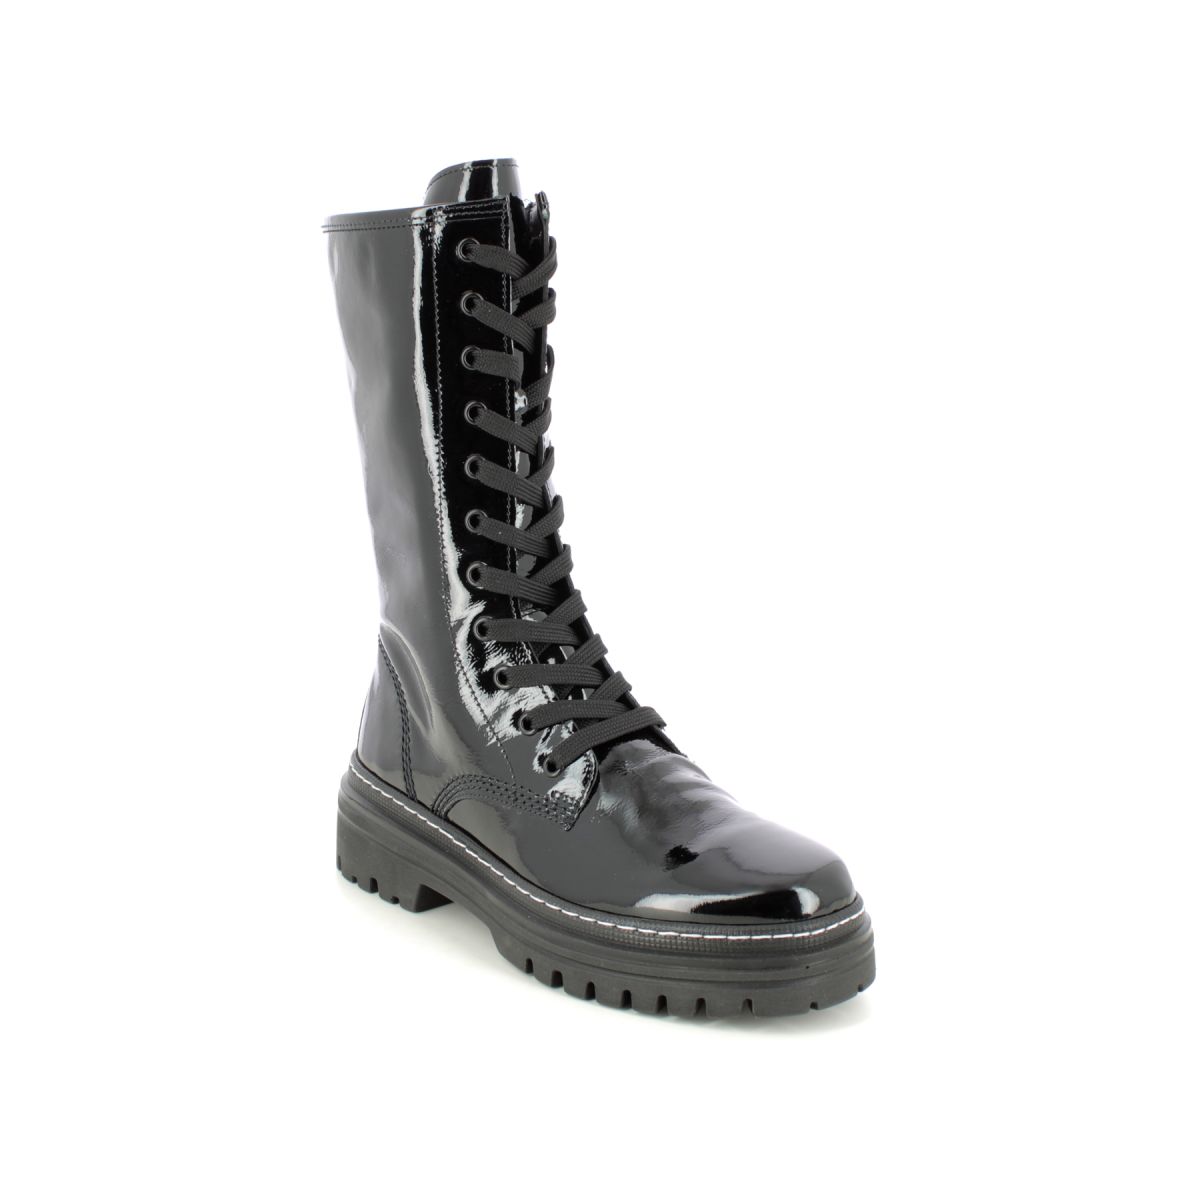 Gabor Ghent Mid Calf Black patent Womens Biker Boots 91.723.97 in a Plain Leather in Size 6.5